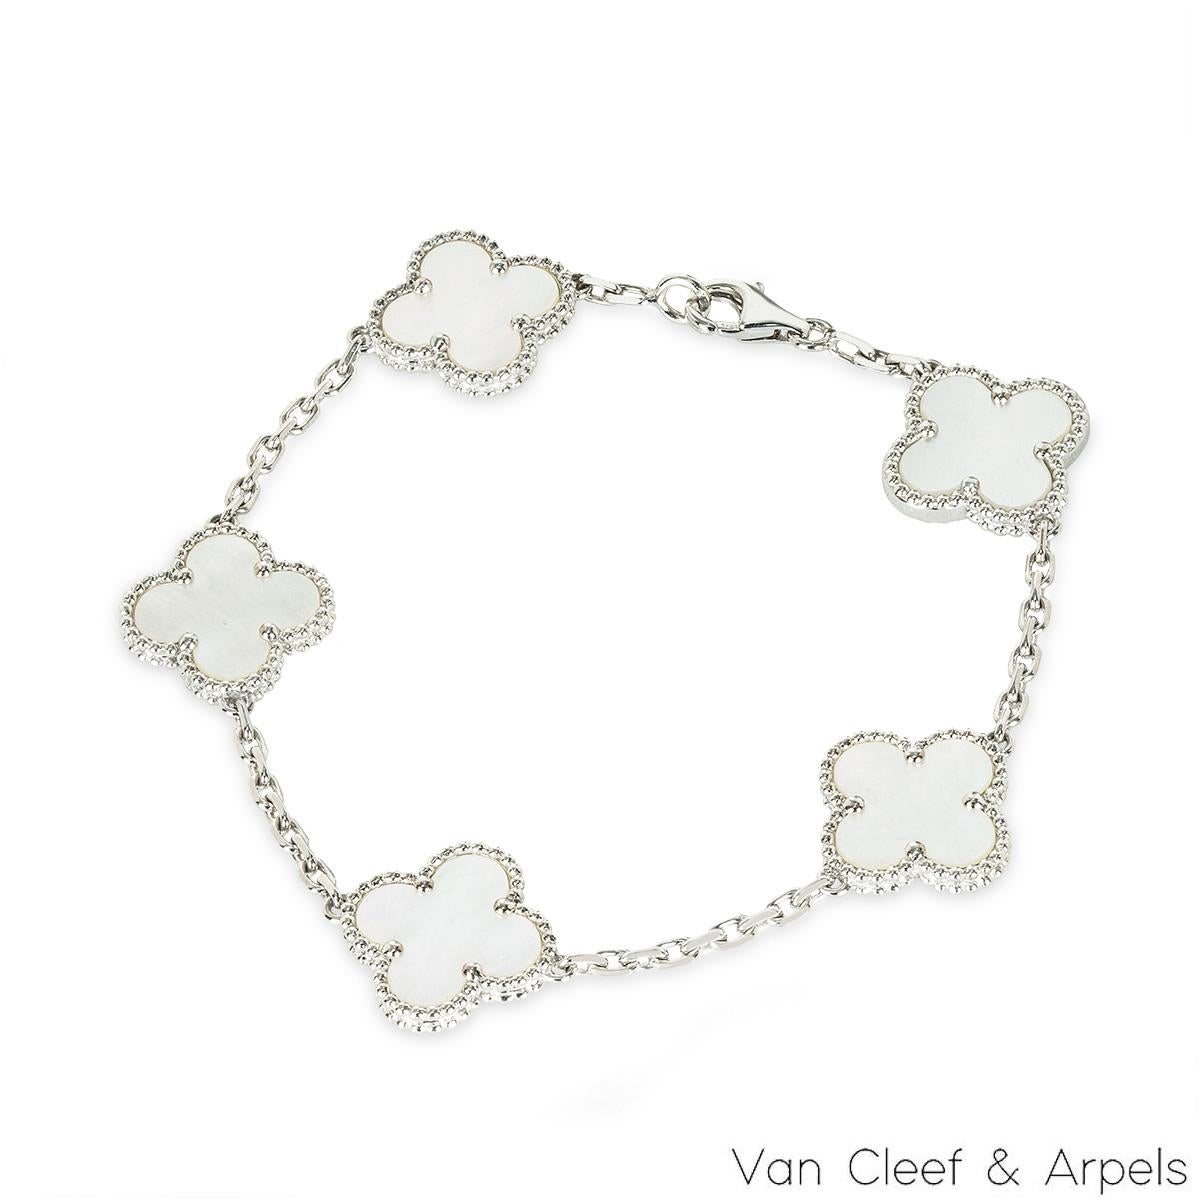 A classic 18k white gold mother of pearl bracelet by Van Cleef and Arpels from the Vintage Alhambra Collection. The stylish bracelet is made up of 5 iconic 4-leaf clover motifs, each set with a beaded edge and mother of pearl inlay, set throughout